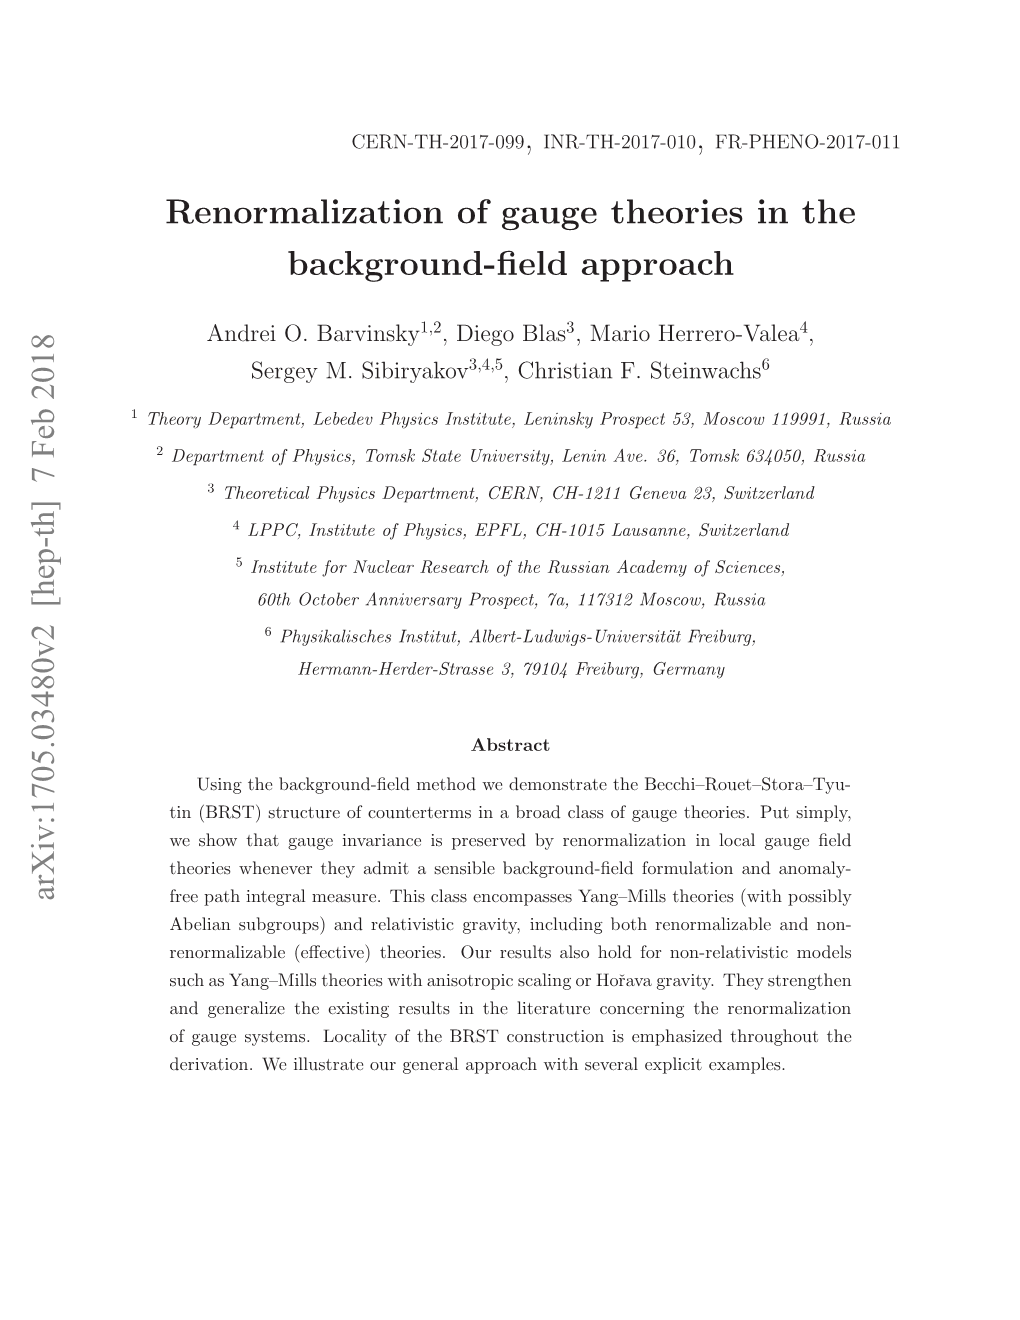 Renormalization of Gauge Theories in the Background-Field Approach